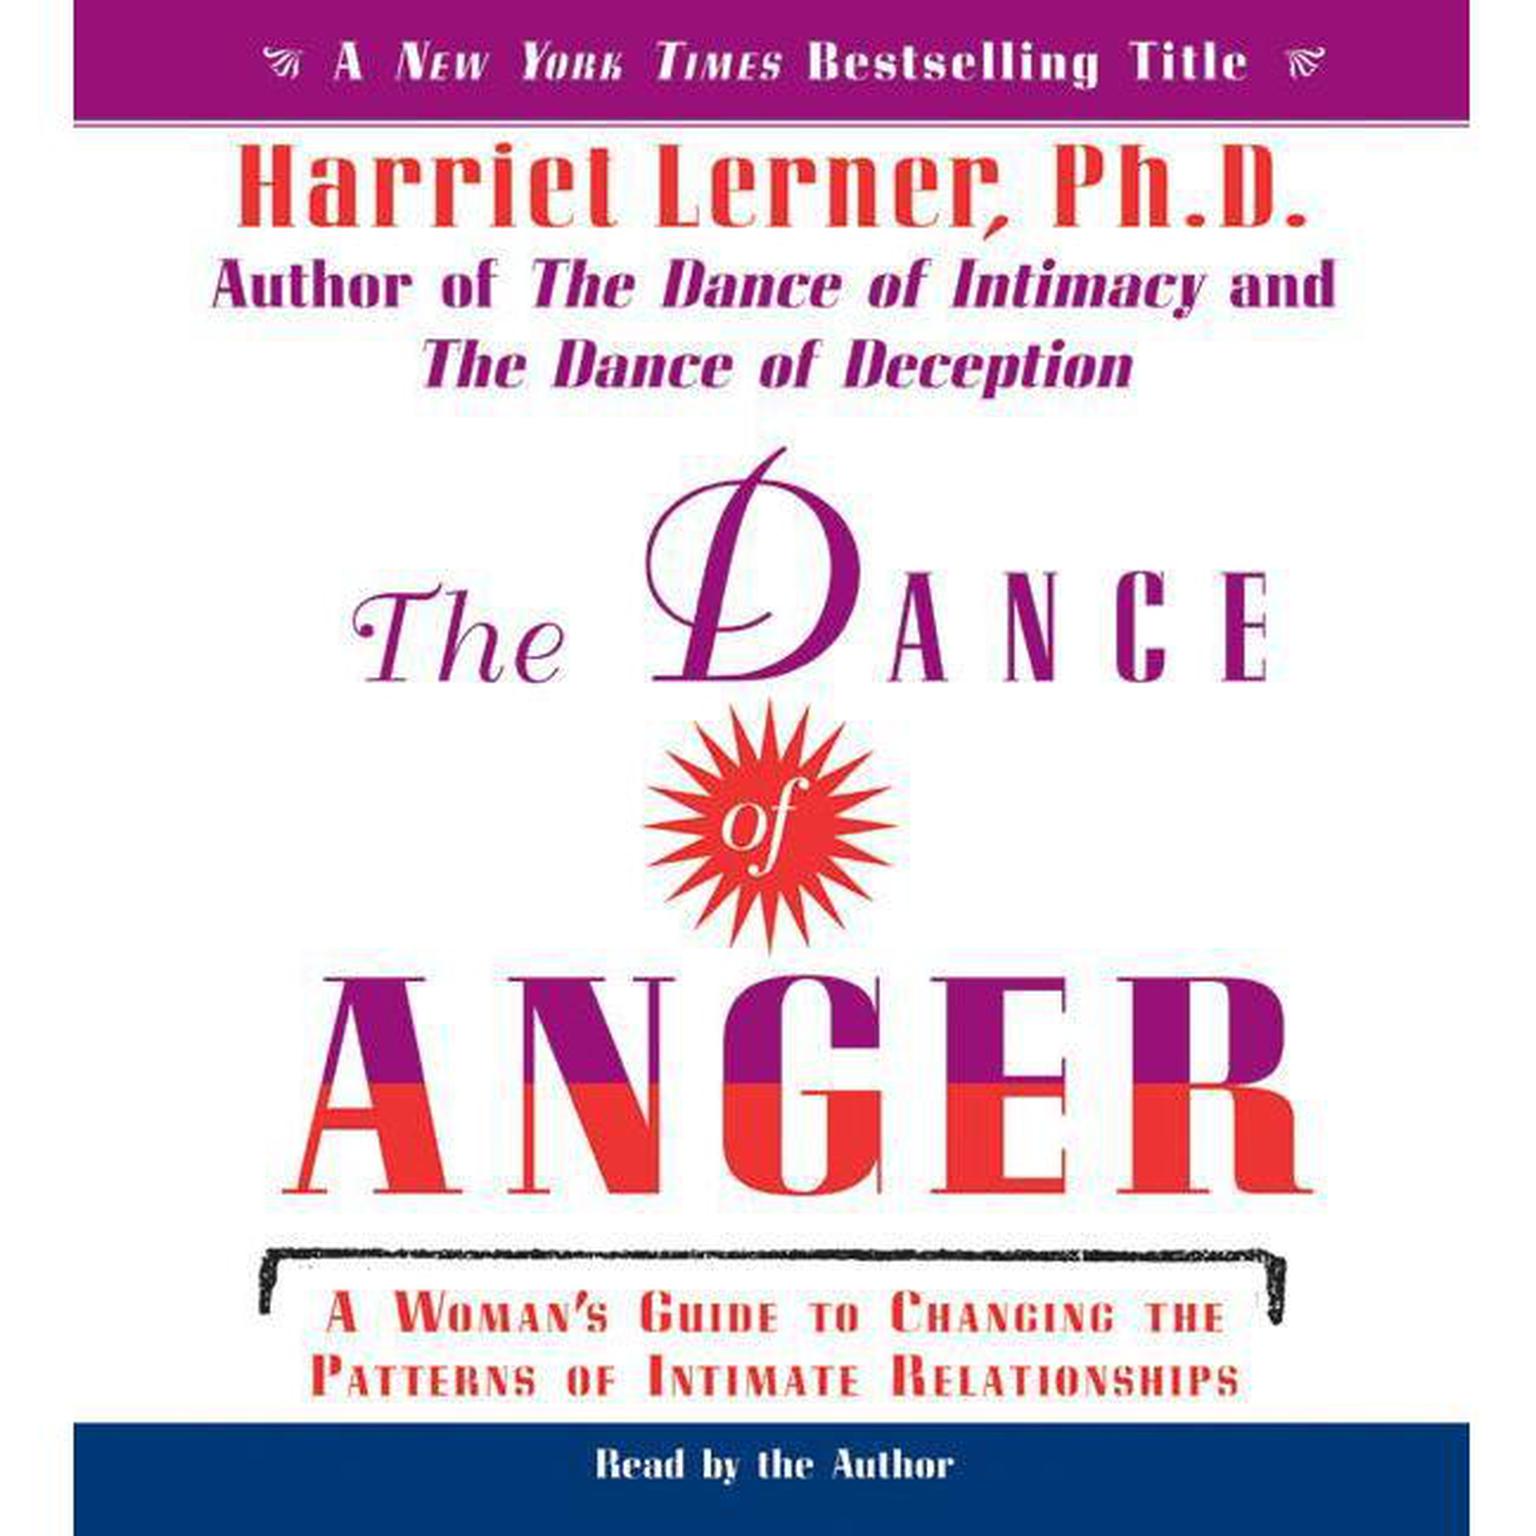 The Dance of Anger (Abridged): A Womans Guide to Changing the Pattern of Intimate Relationships Audiobook, by Harriet Lerner